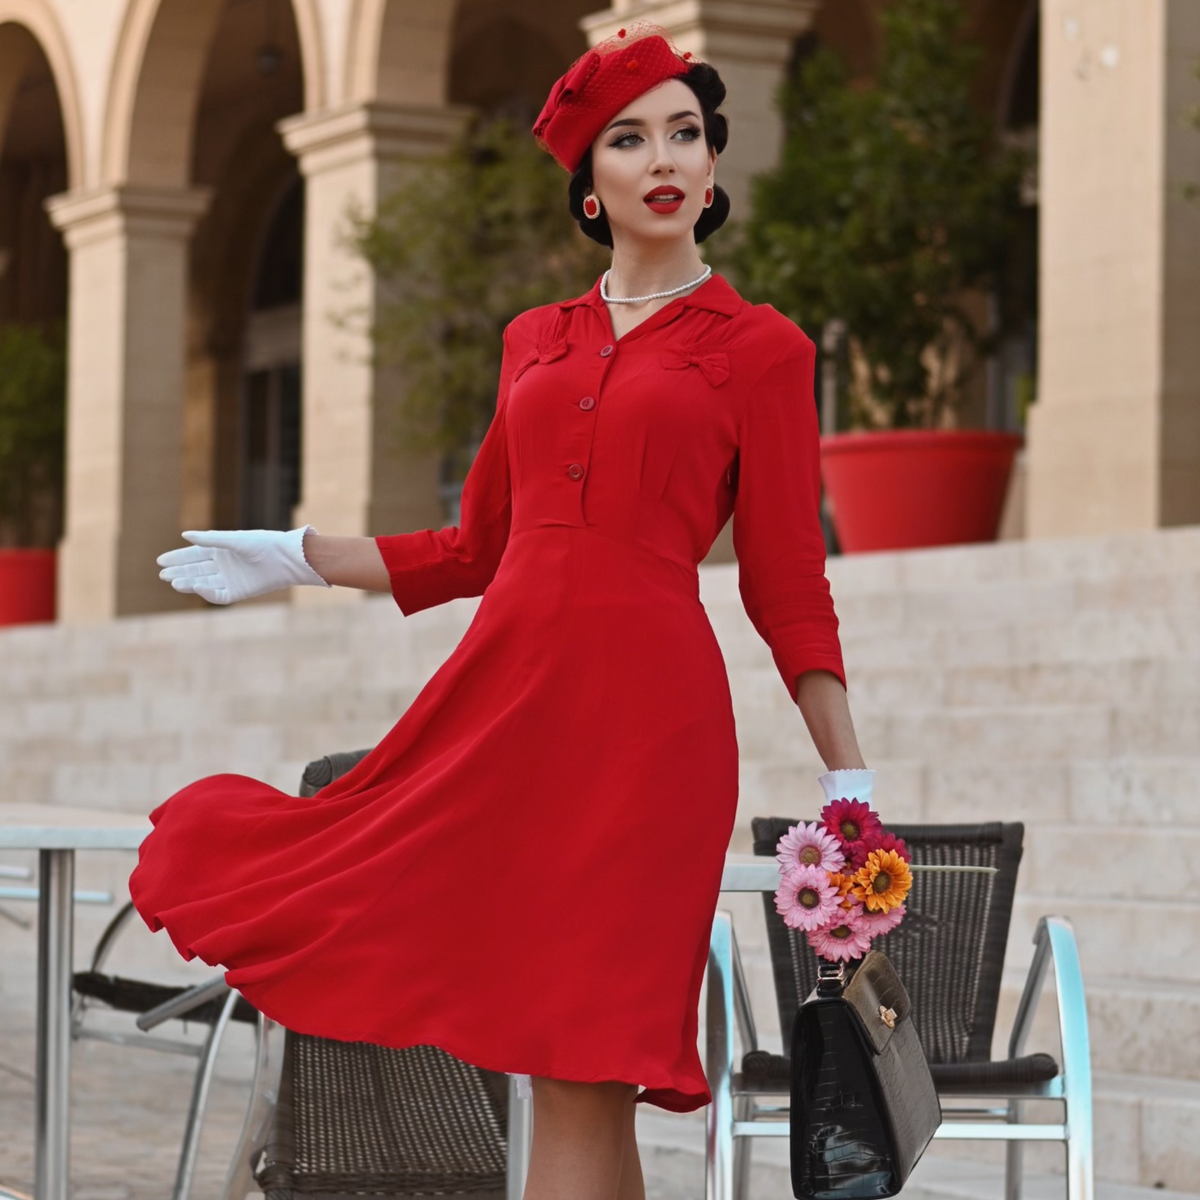 Polly CC41 Dress in Lipstick Red